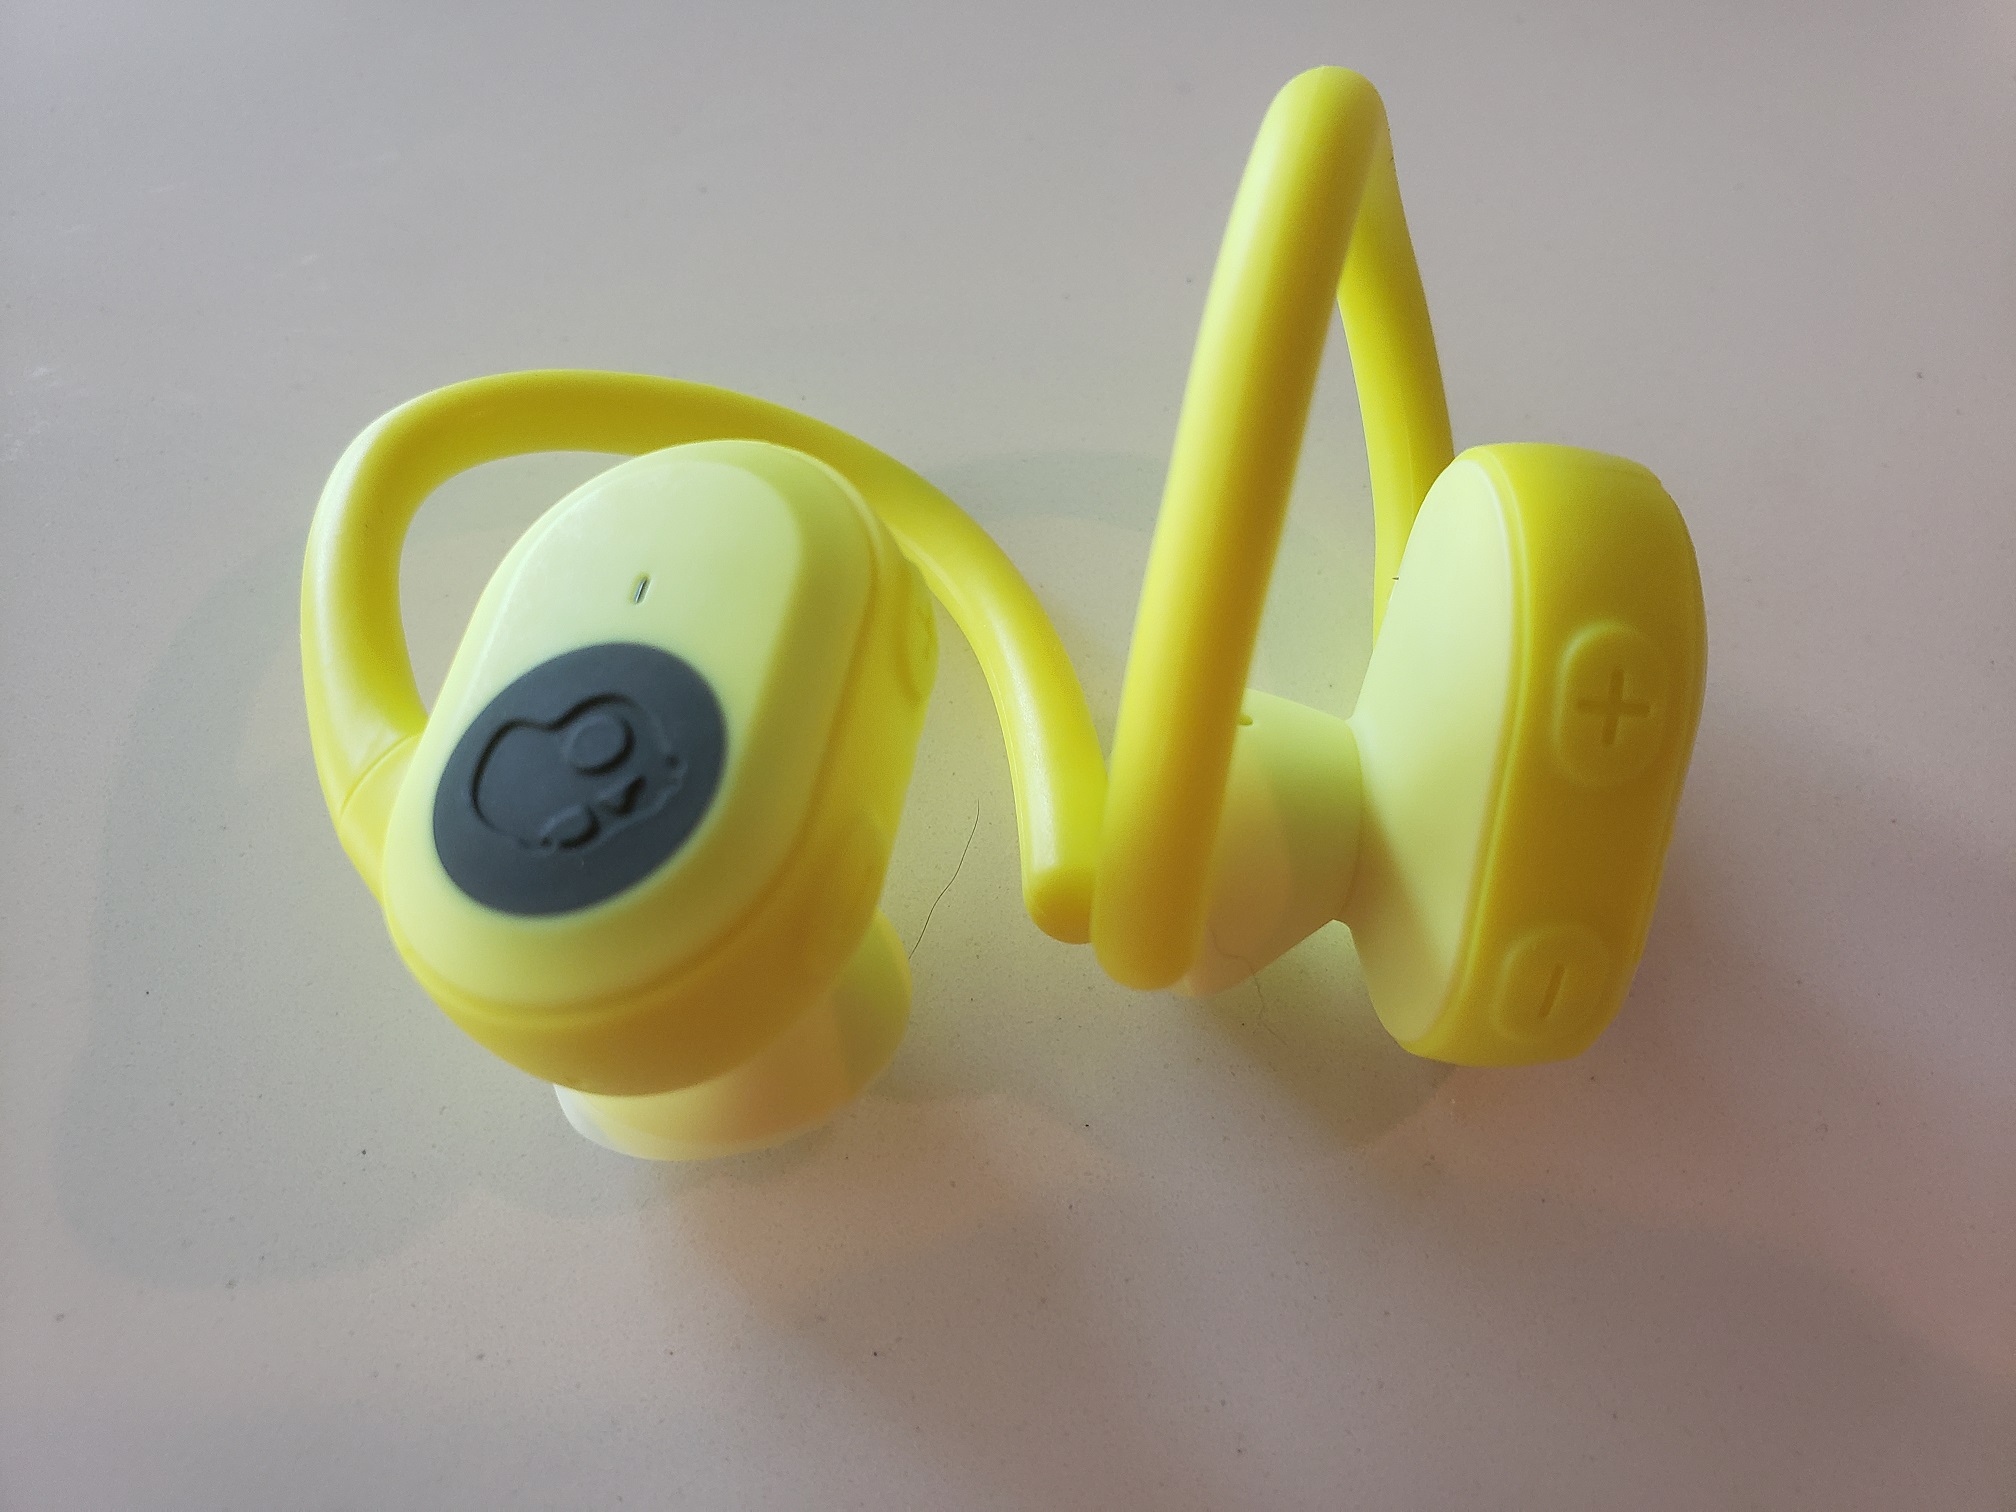 image of the Skullcandy Push Ultra earbuds on a table